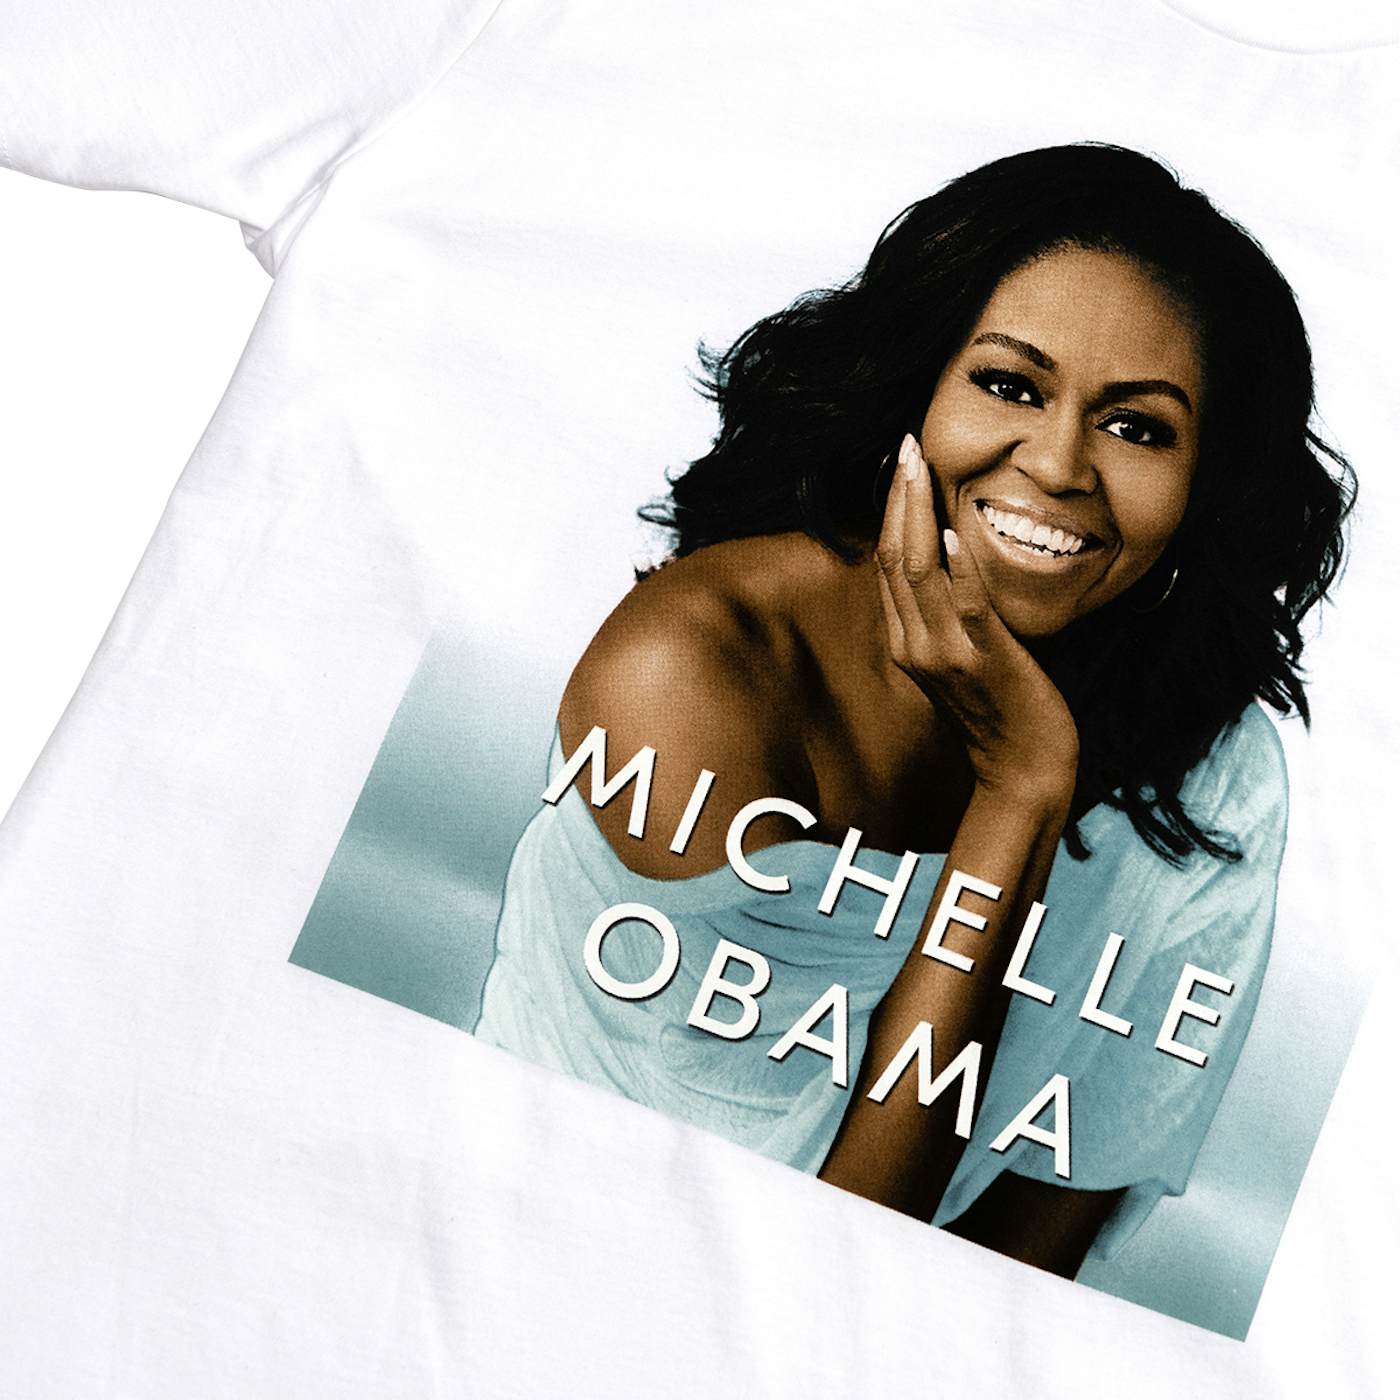 Michelle Obama BECOMING Book Cover T-shirt